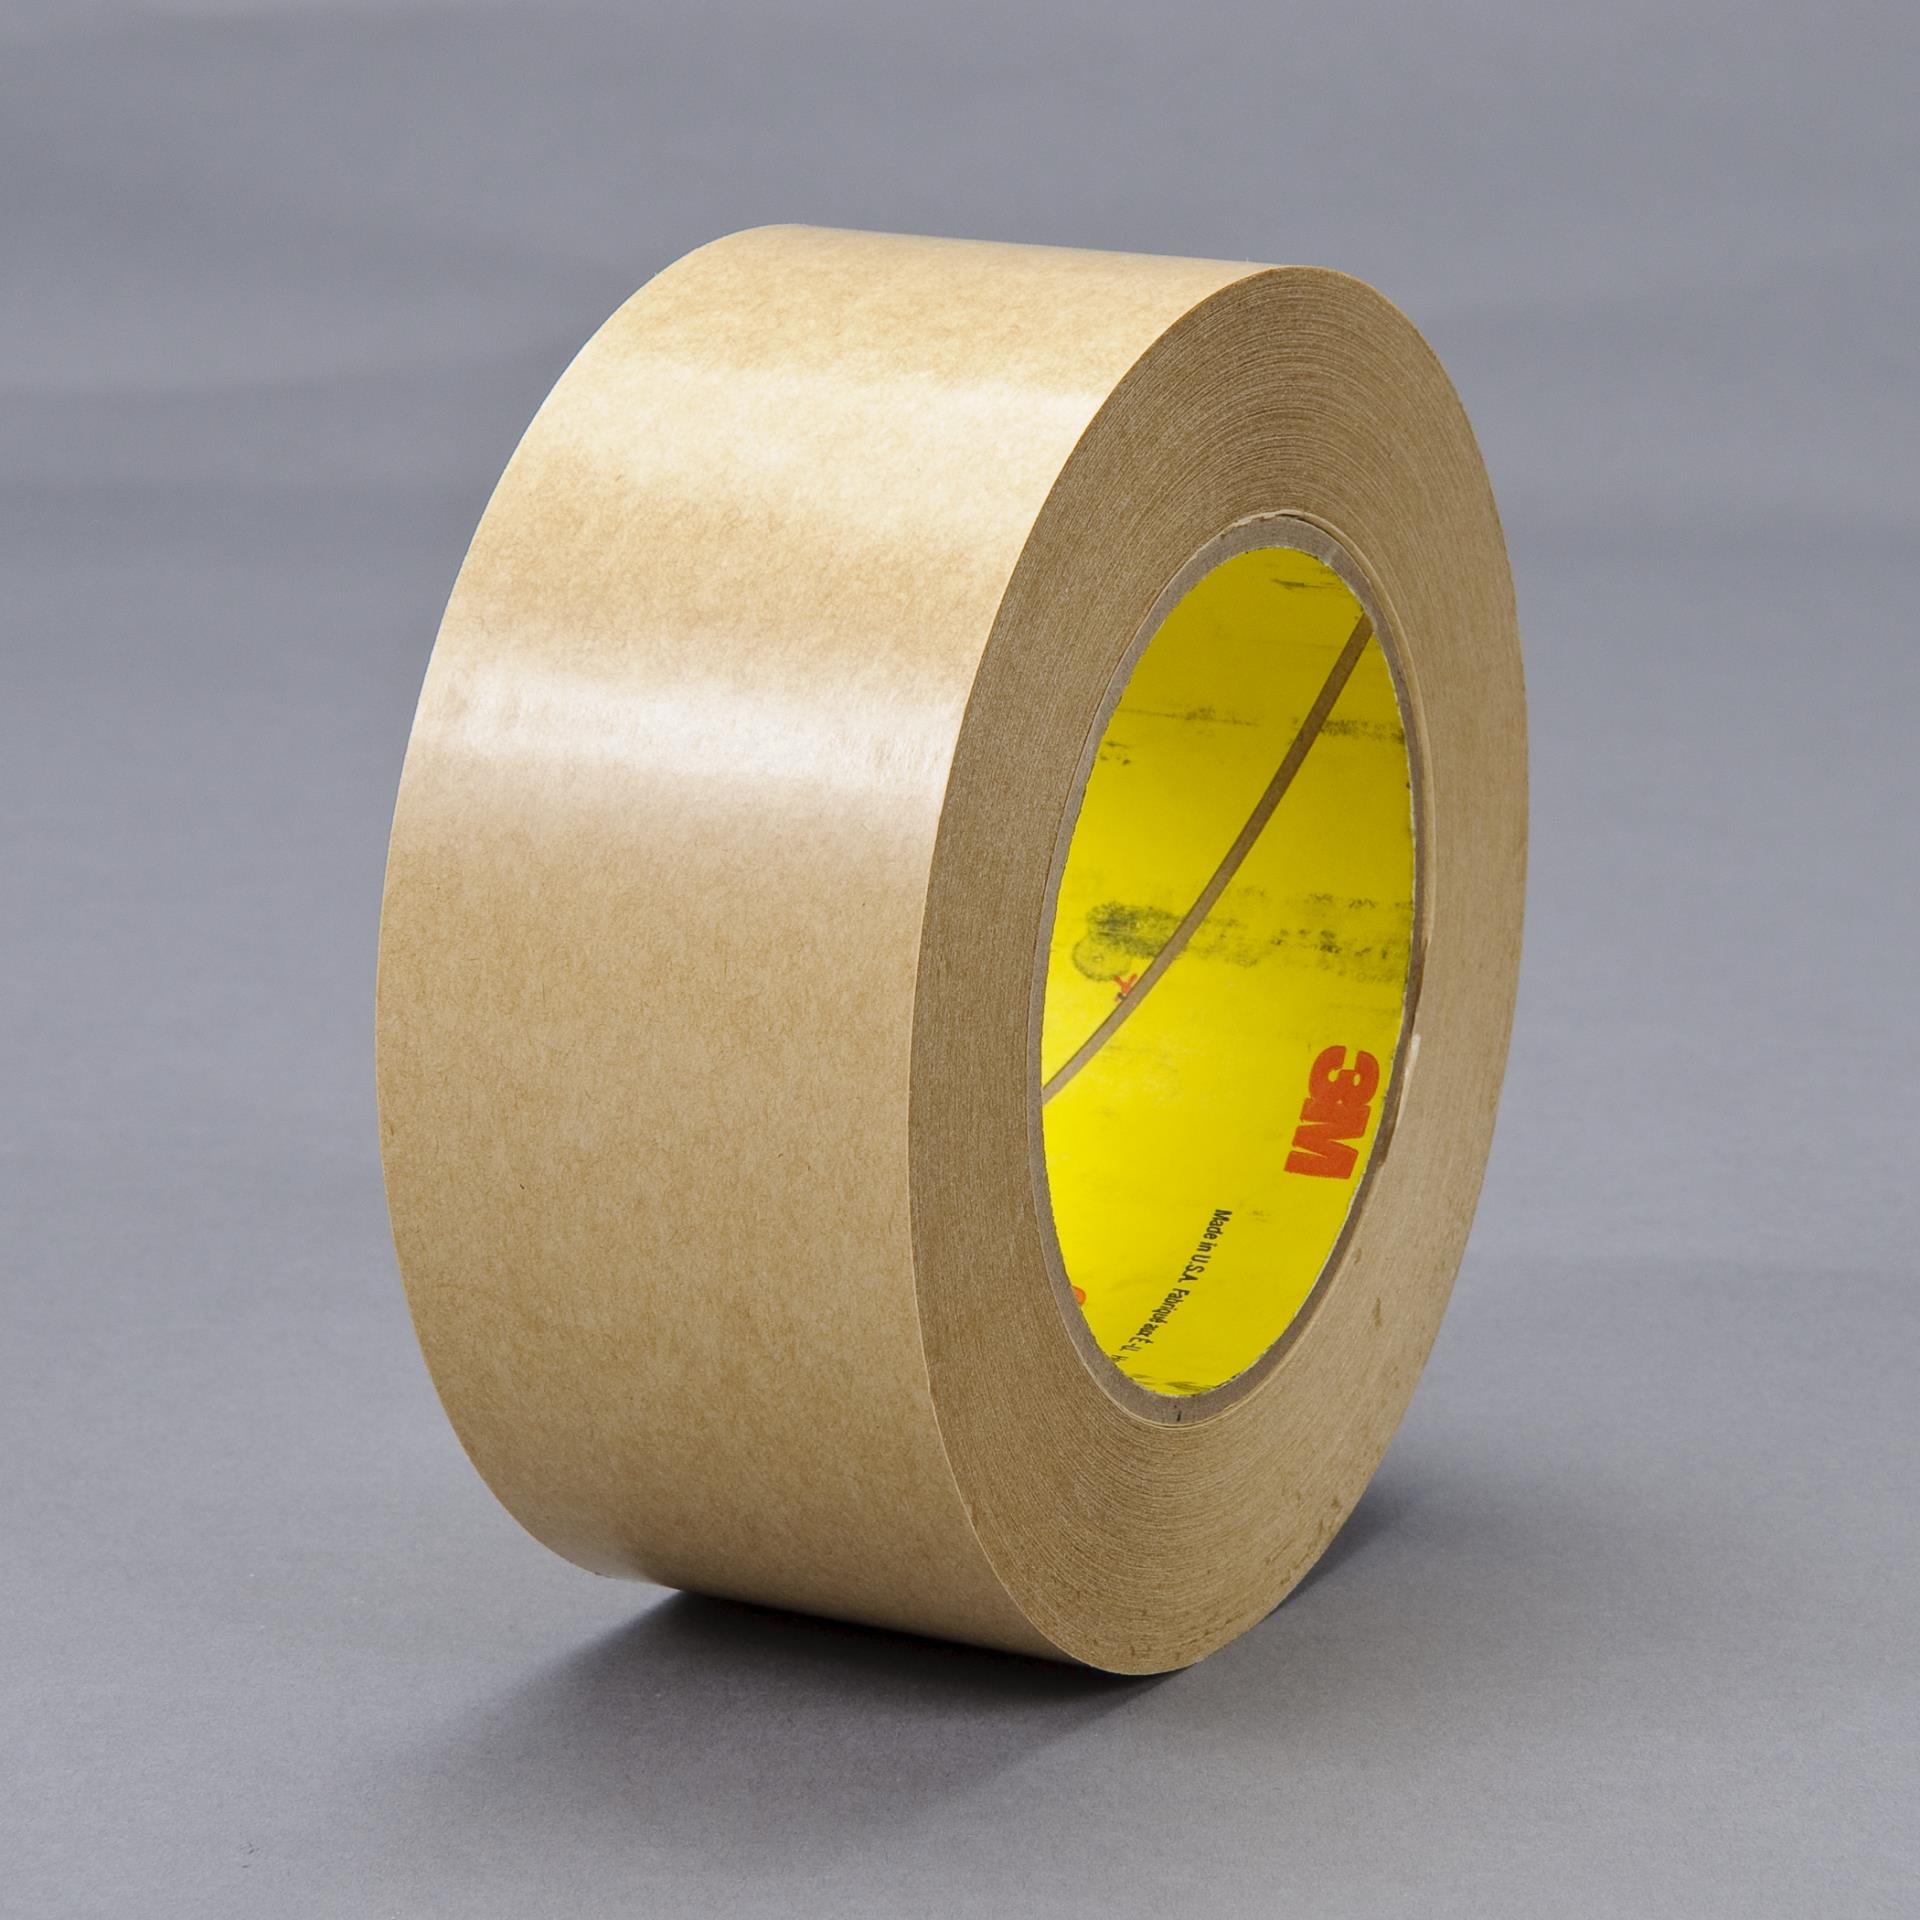 3M 361 0.188 x 60yd White Glass Cloth/Silicone Adhesive Electrical Tape 0.188 Width 0.188 Width 3M 361 0.188 x 60yd -65 degrees F to 450 degrees F 60 yd Length 